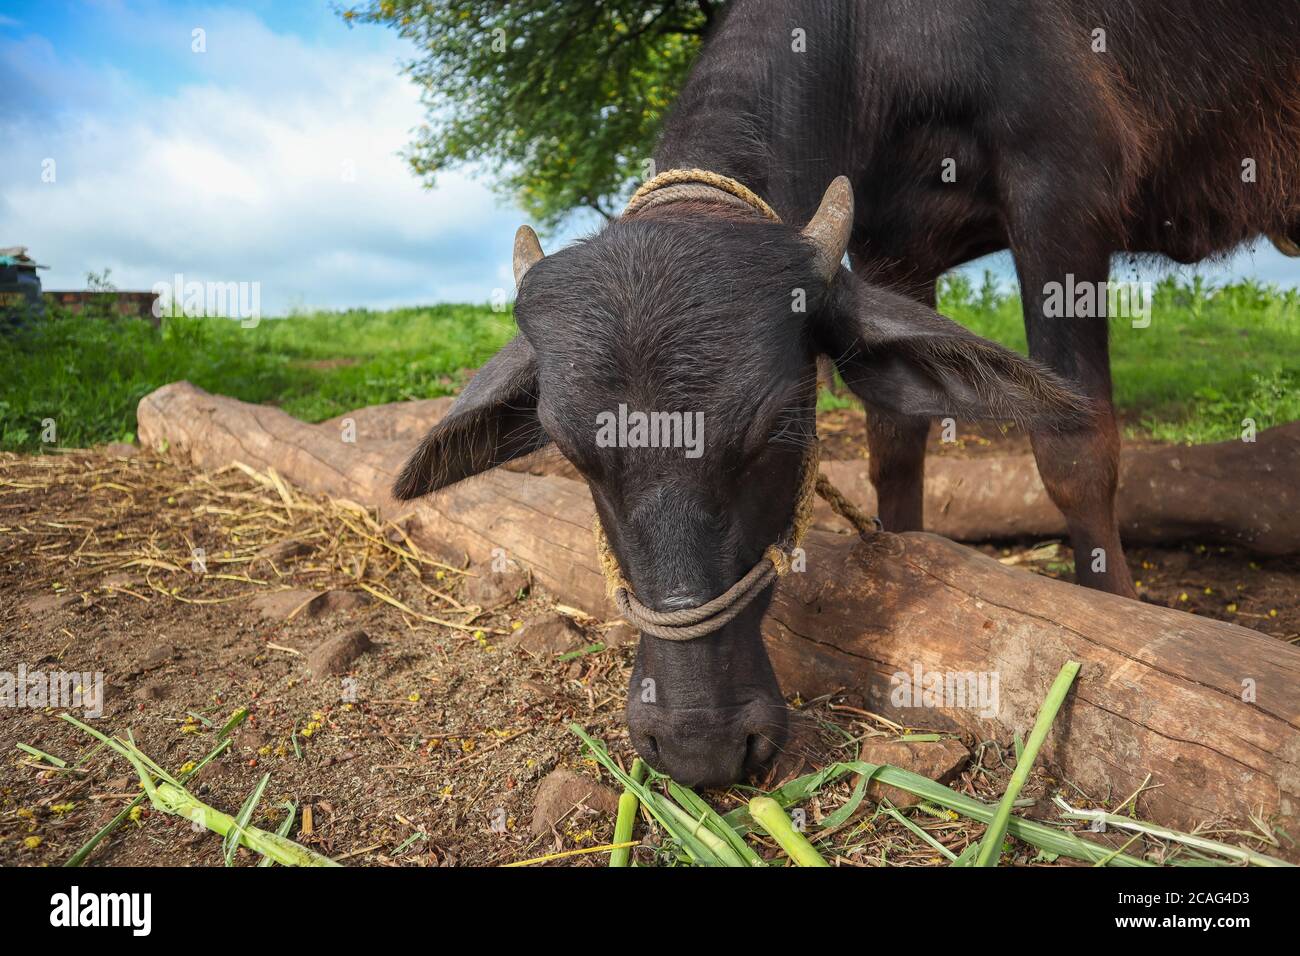 black buffalo stands and eating feed on the ground Stock Photo